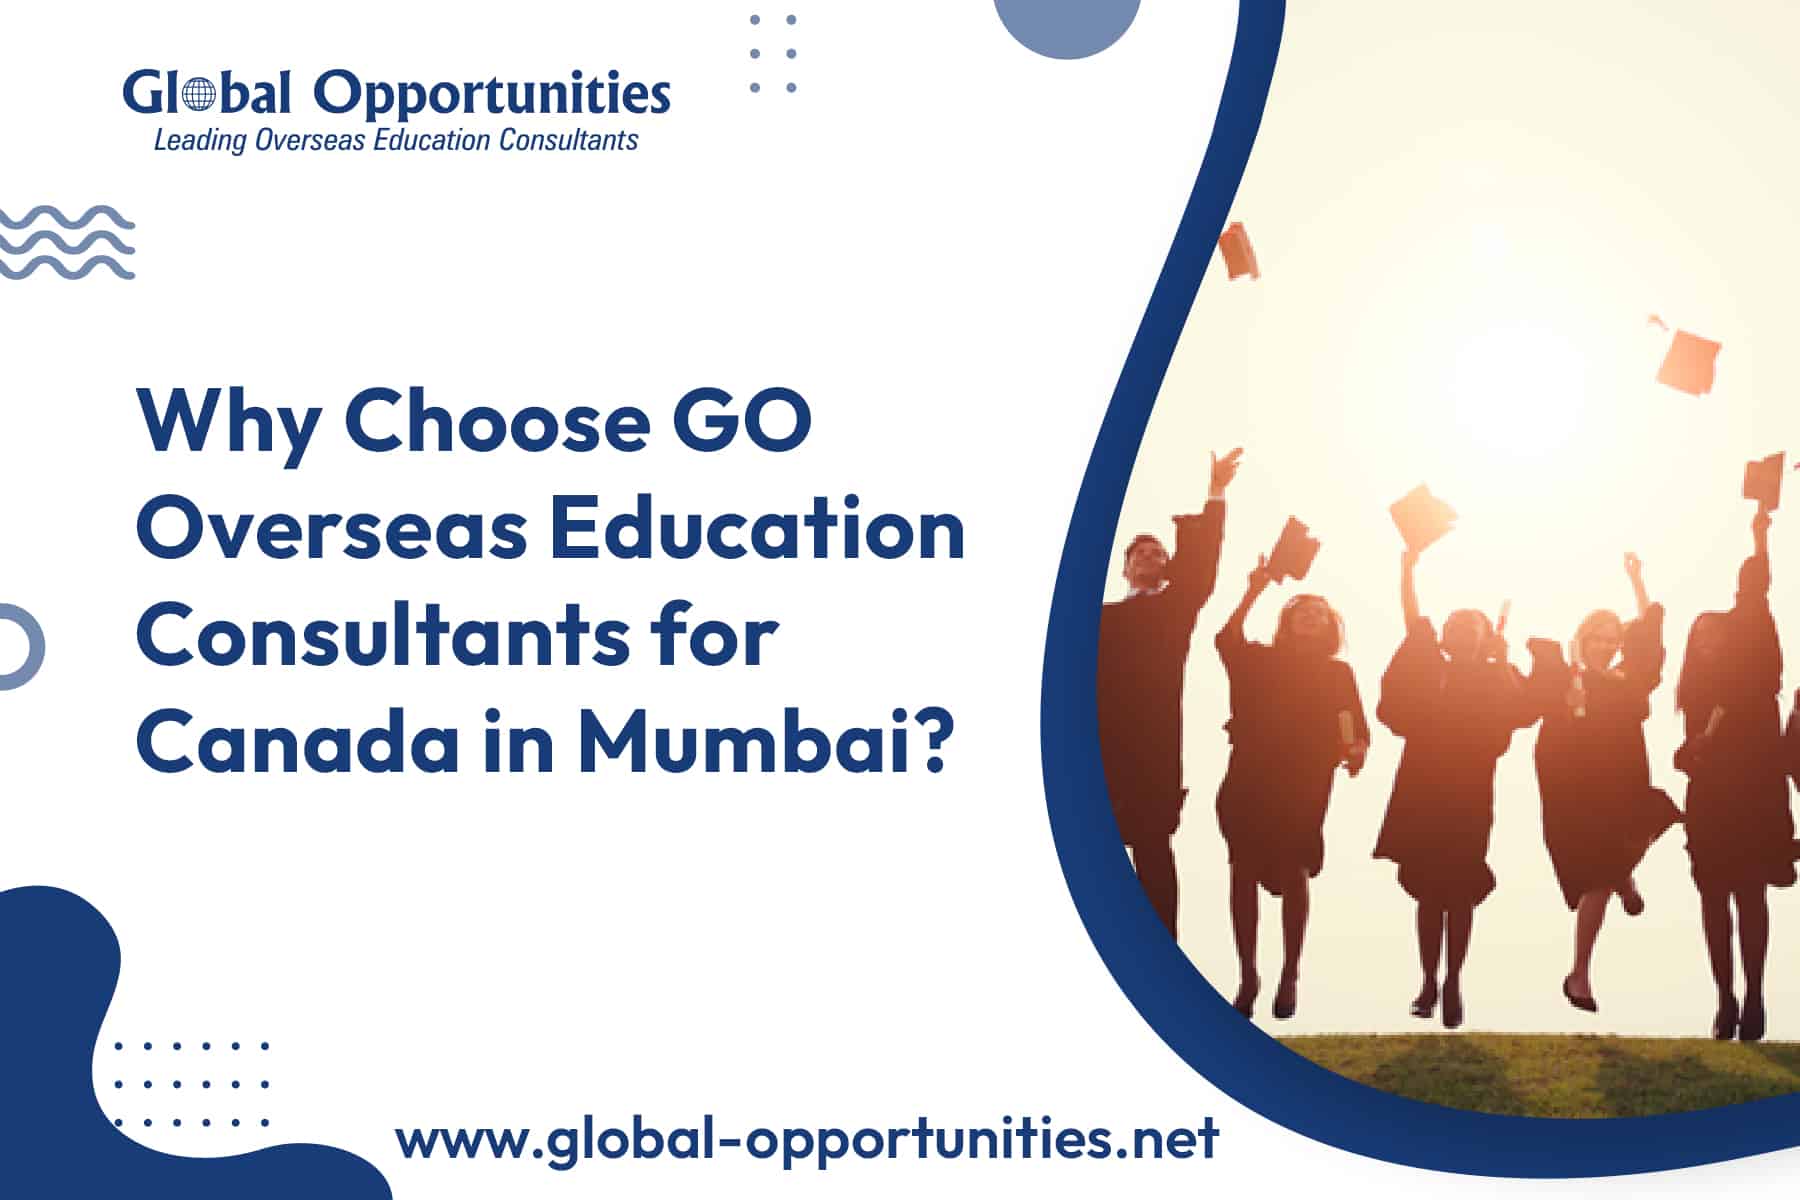 Why Choose GO Overseas Education Consultants for Canada in Mumbai?